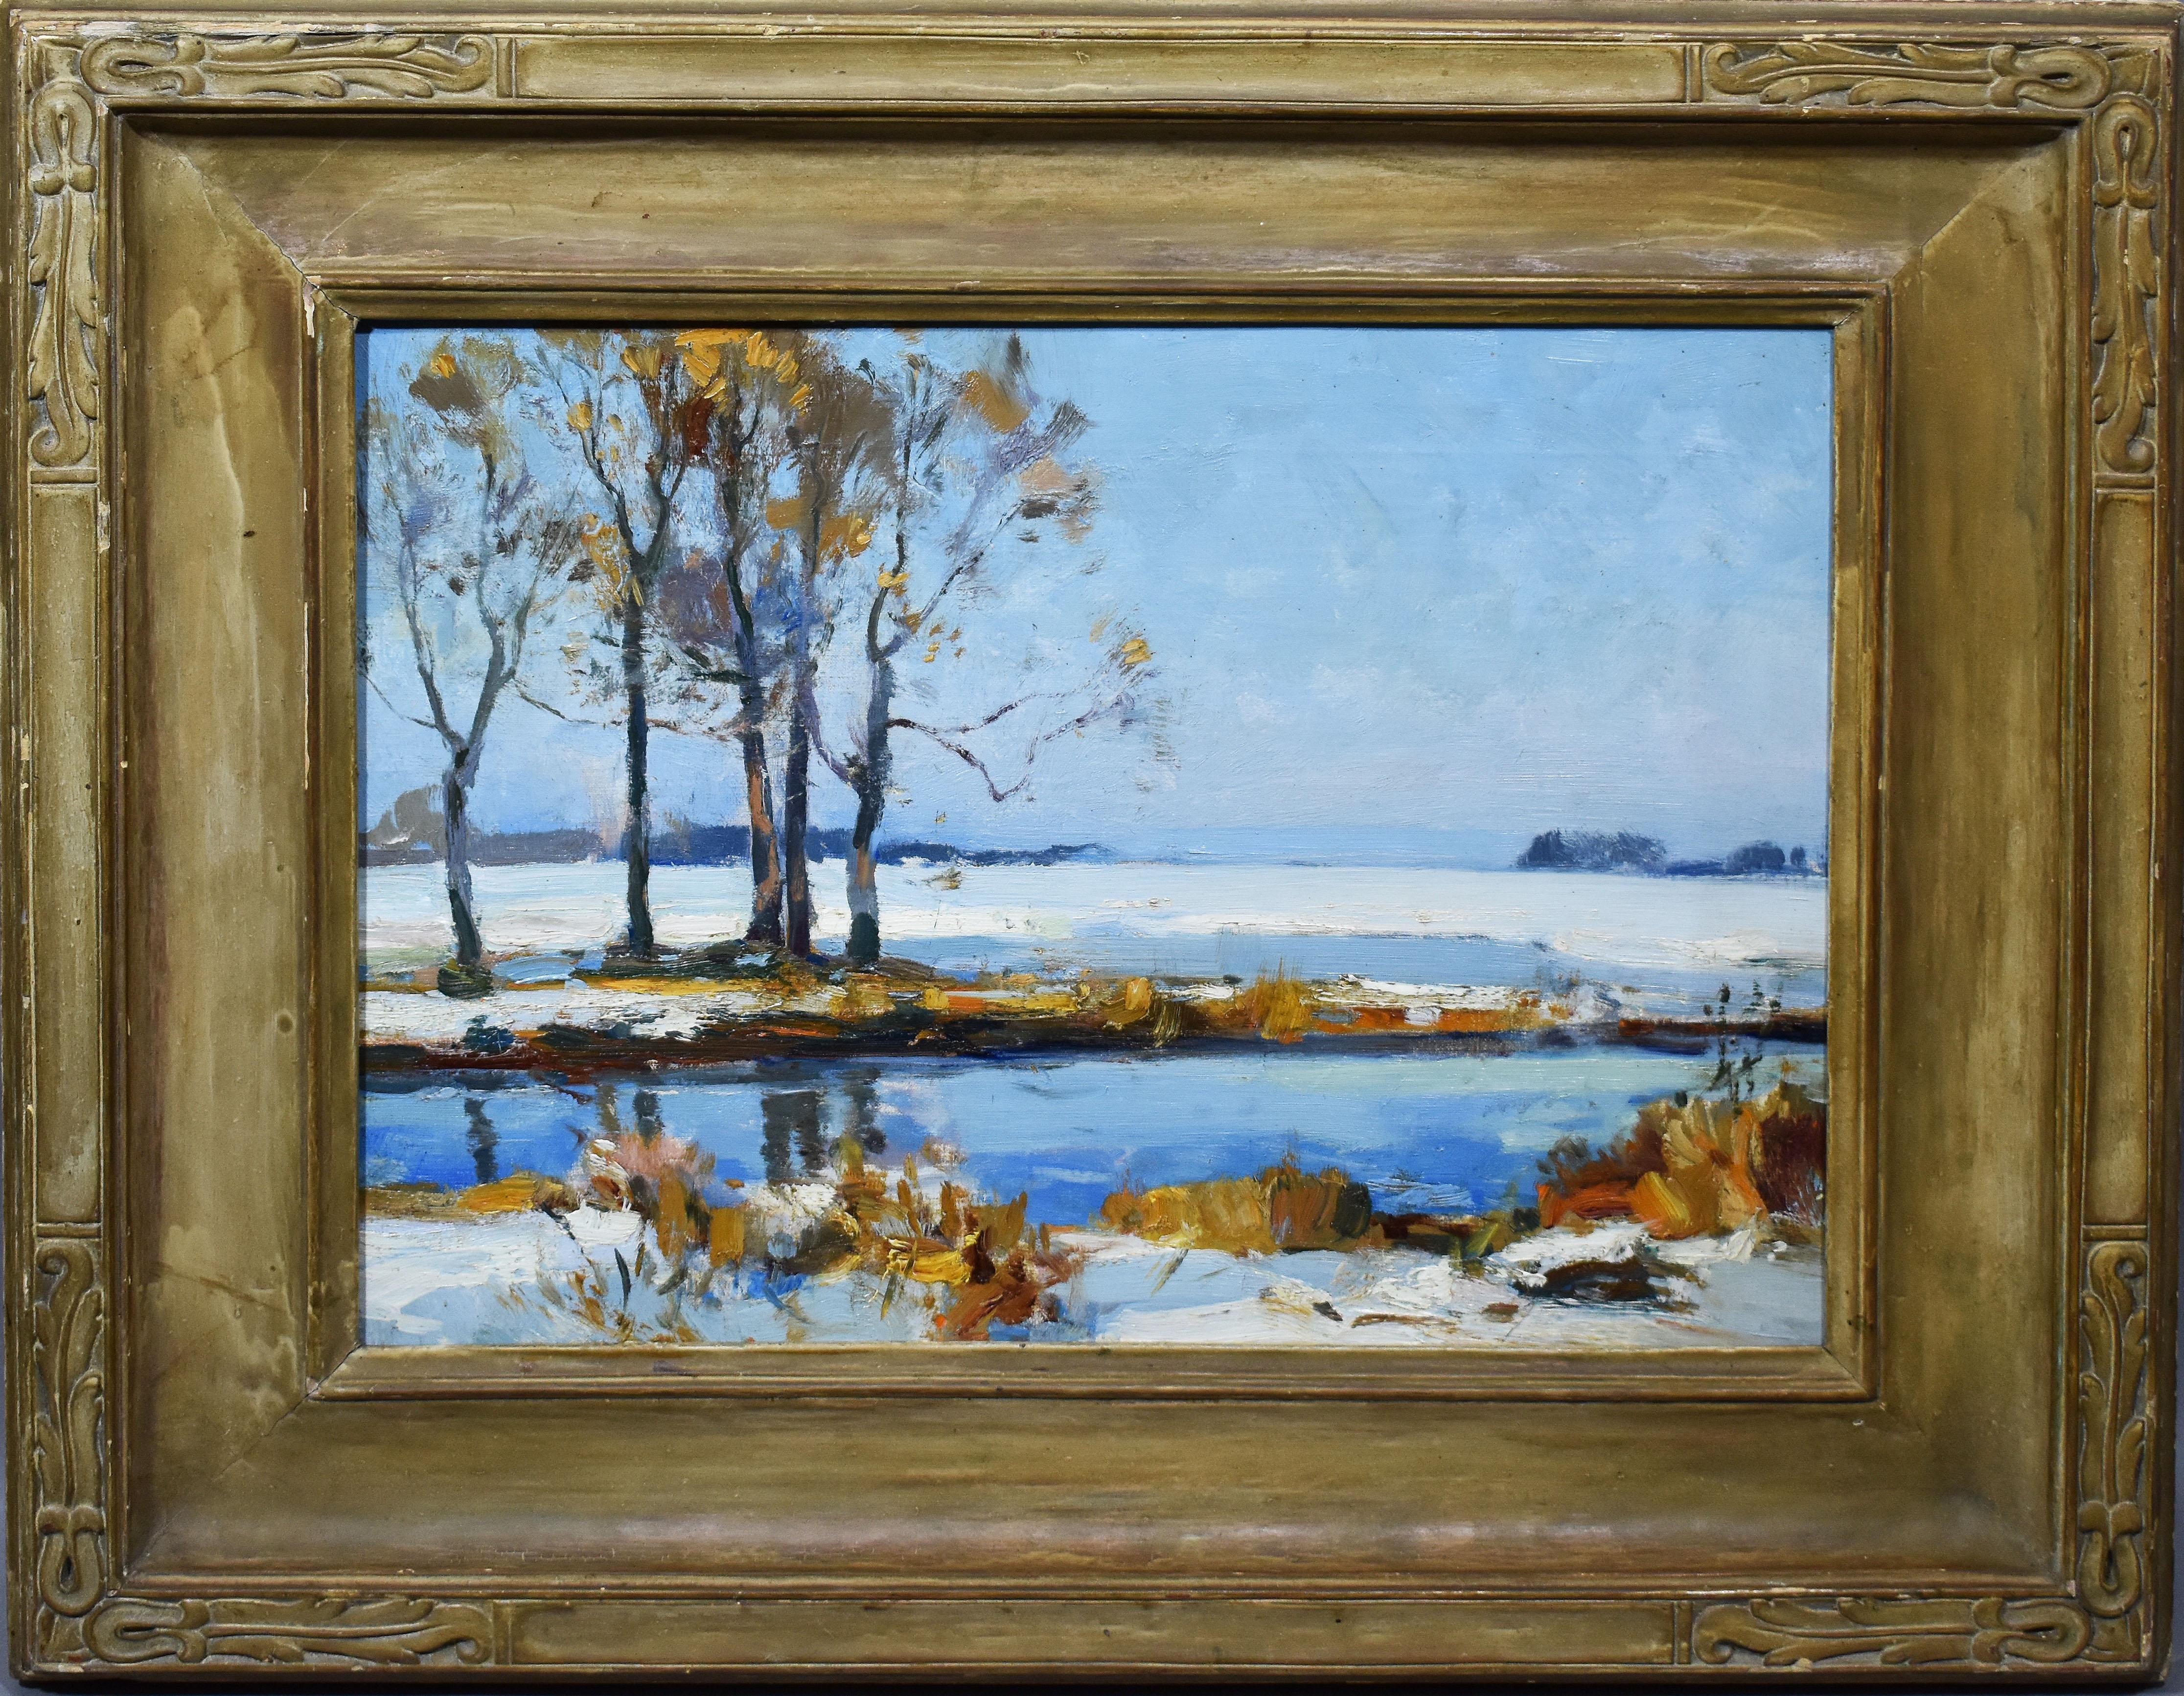 Walter Granville-Smith Landscape Painting - Antique American Impressionist Winter Long Island New York Landscape  Painting